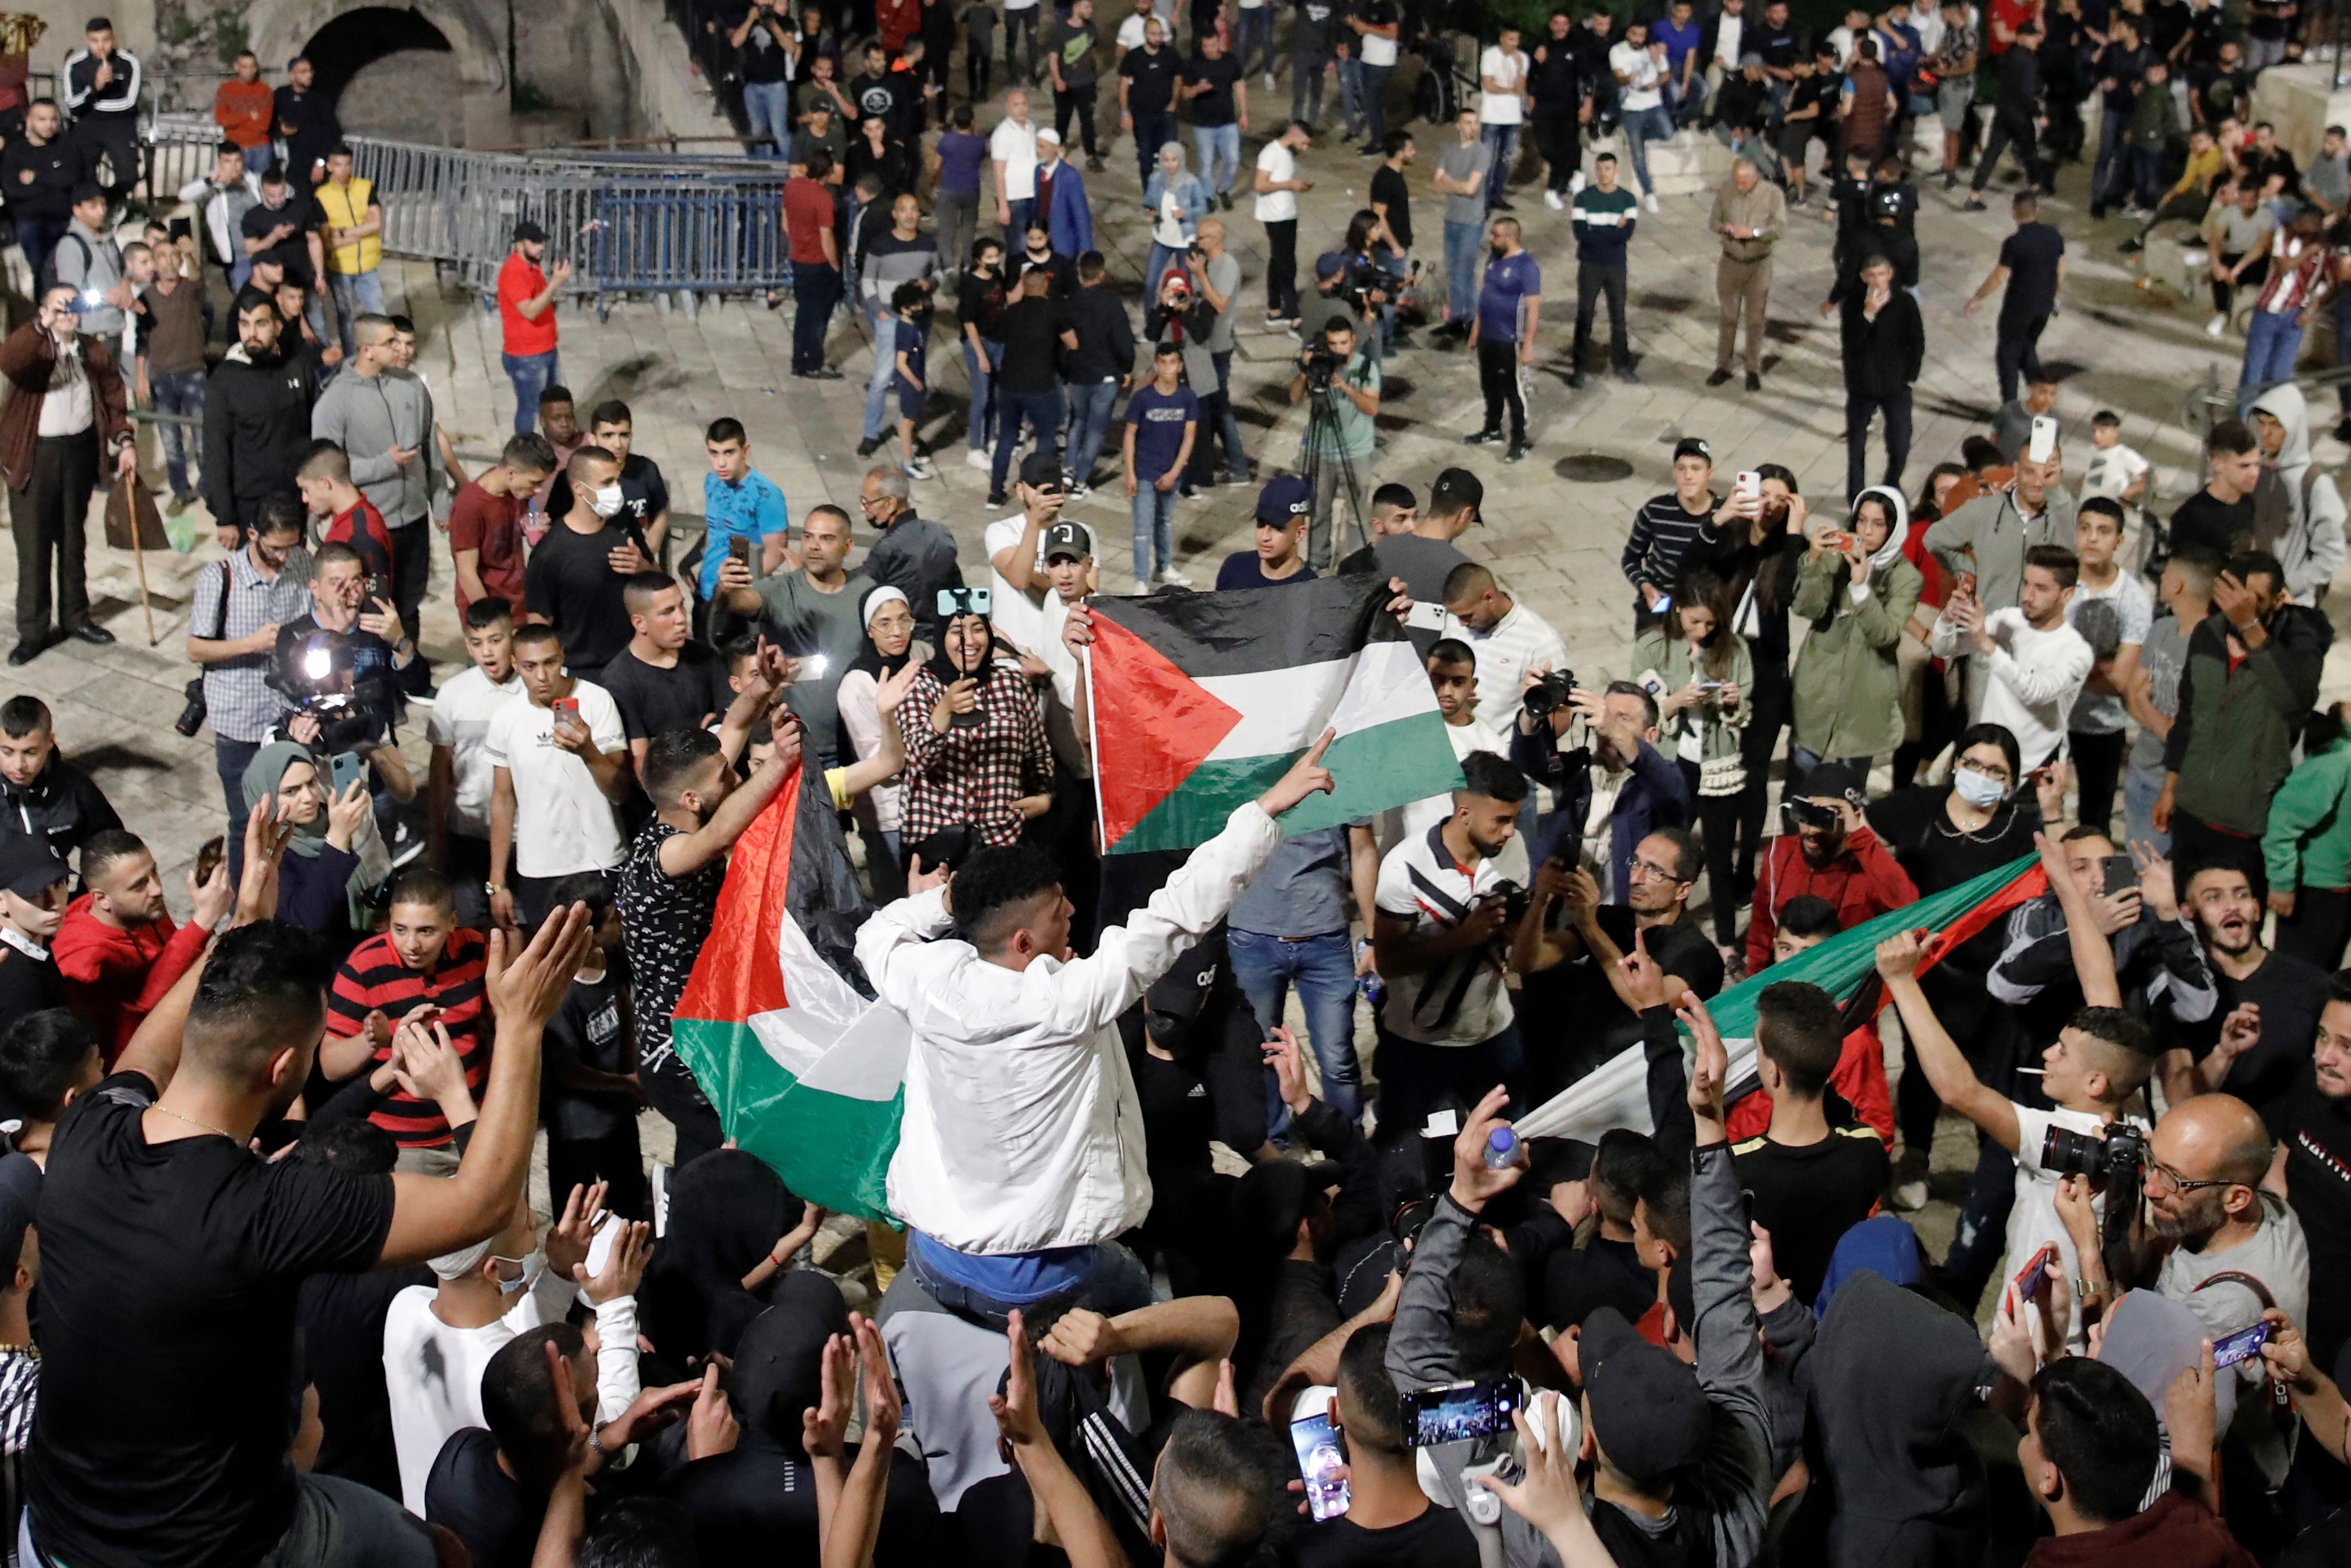 Palestinian protesters raise national flags as they gather near the Damascus Gate in Jerusalem's Old City, on April 25, 2021.